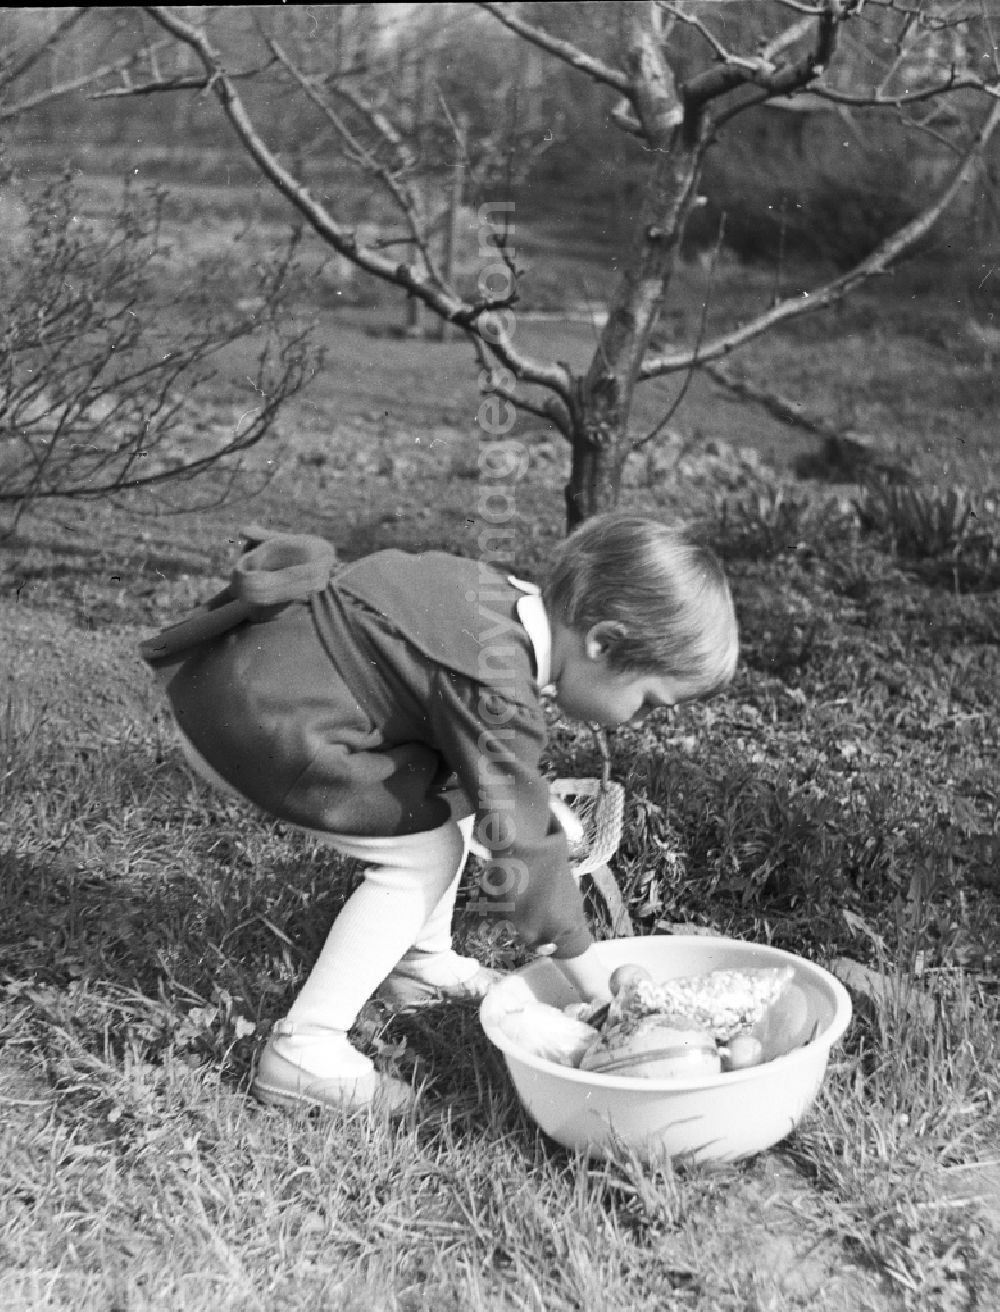 GDR picture archive: Zschopau - A small child in a dress with the Easter egg look in the garden in Zschopau in the federal state Saxony in the area of the former GDR, German democratic republic